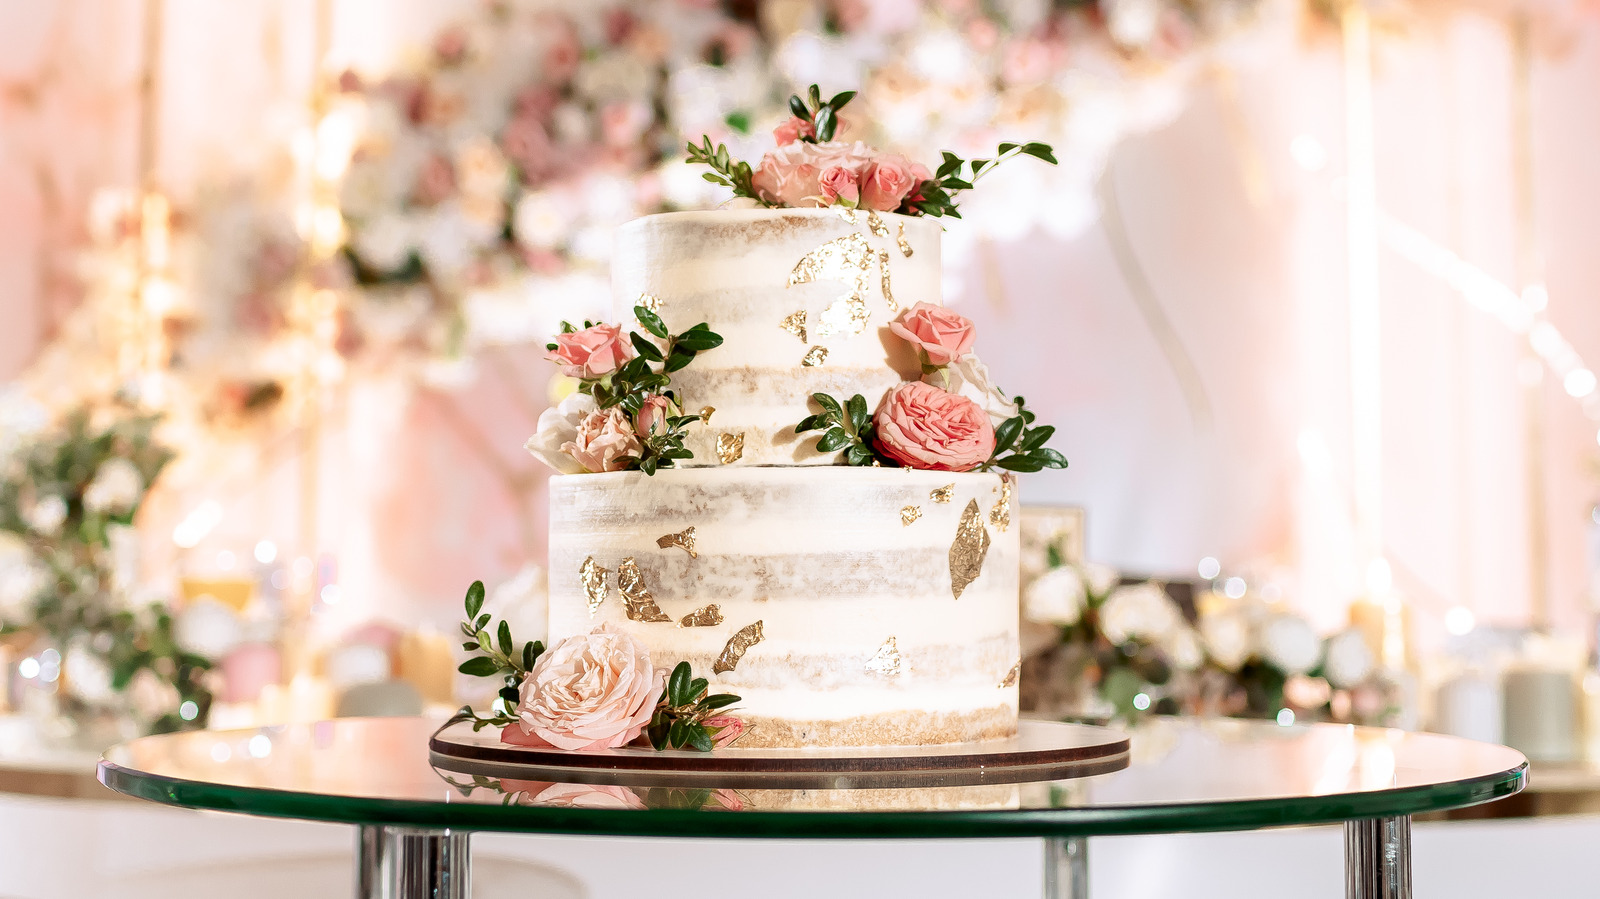 an amazing Sylvia Weinstock cake from a wedding this past weekend. | Floral  wedding cakes, Floral wedding, Wedding cake images